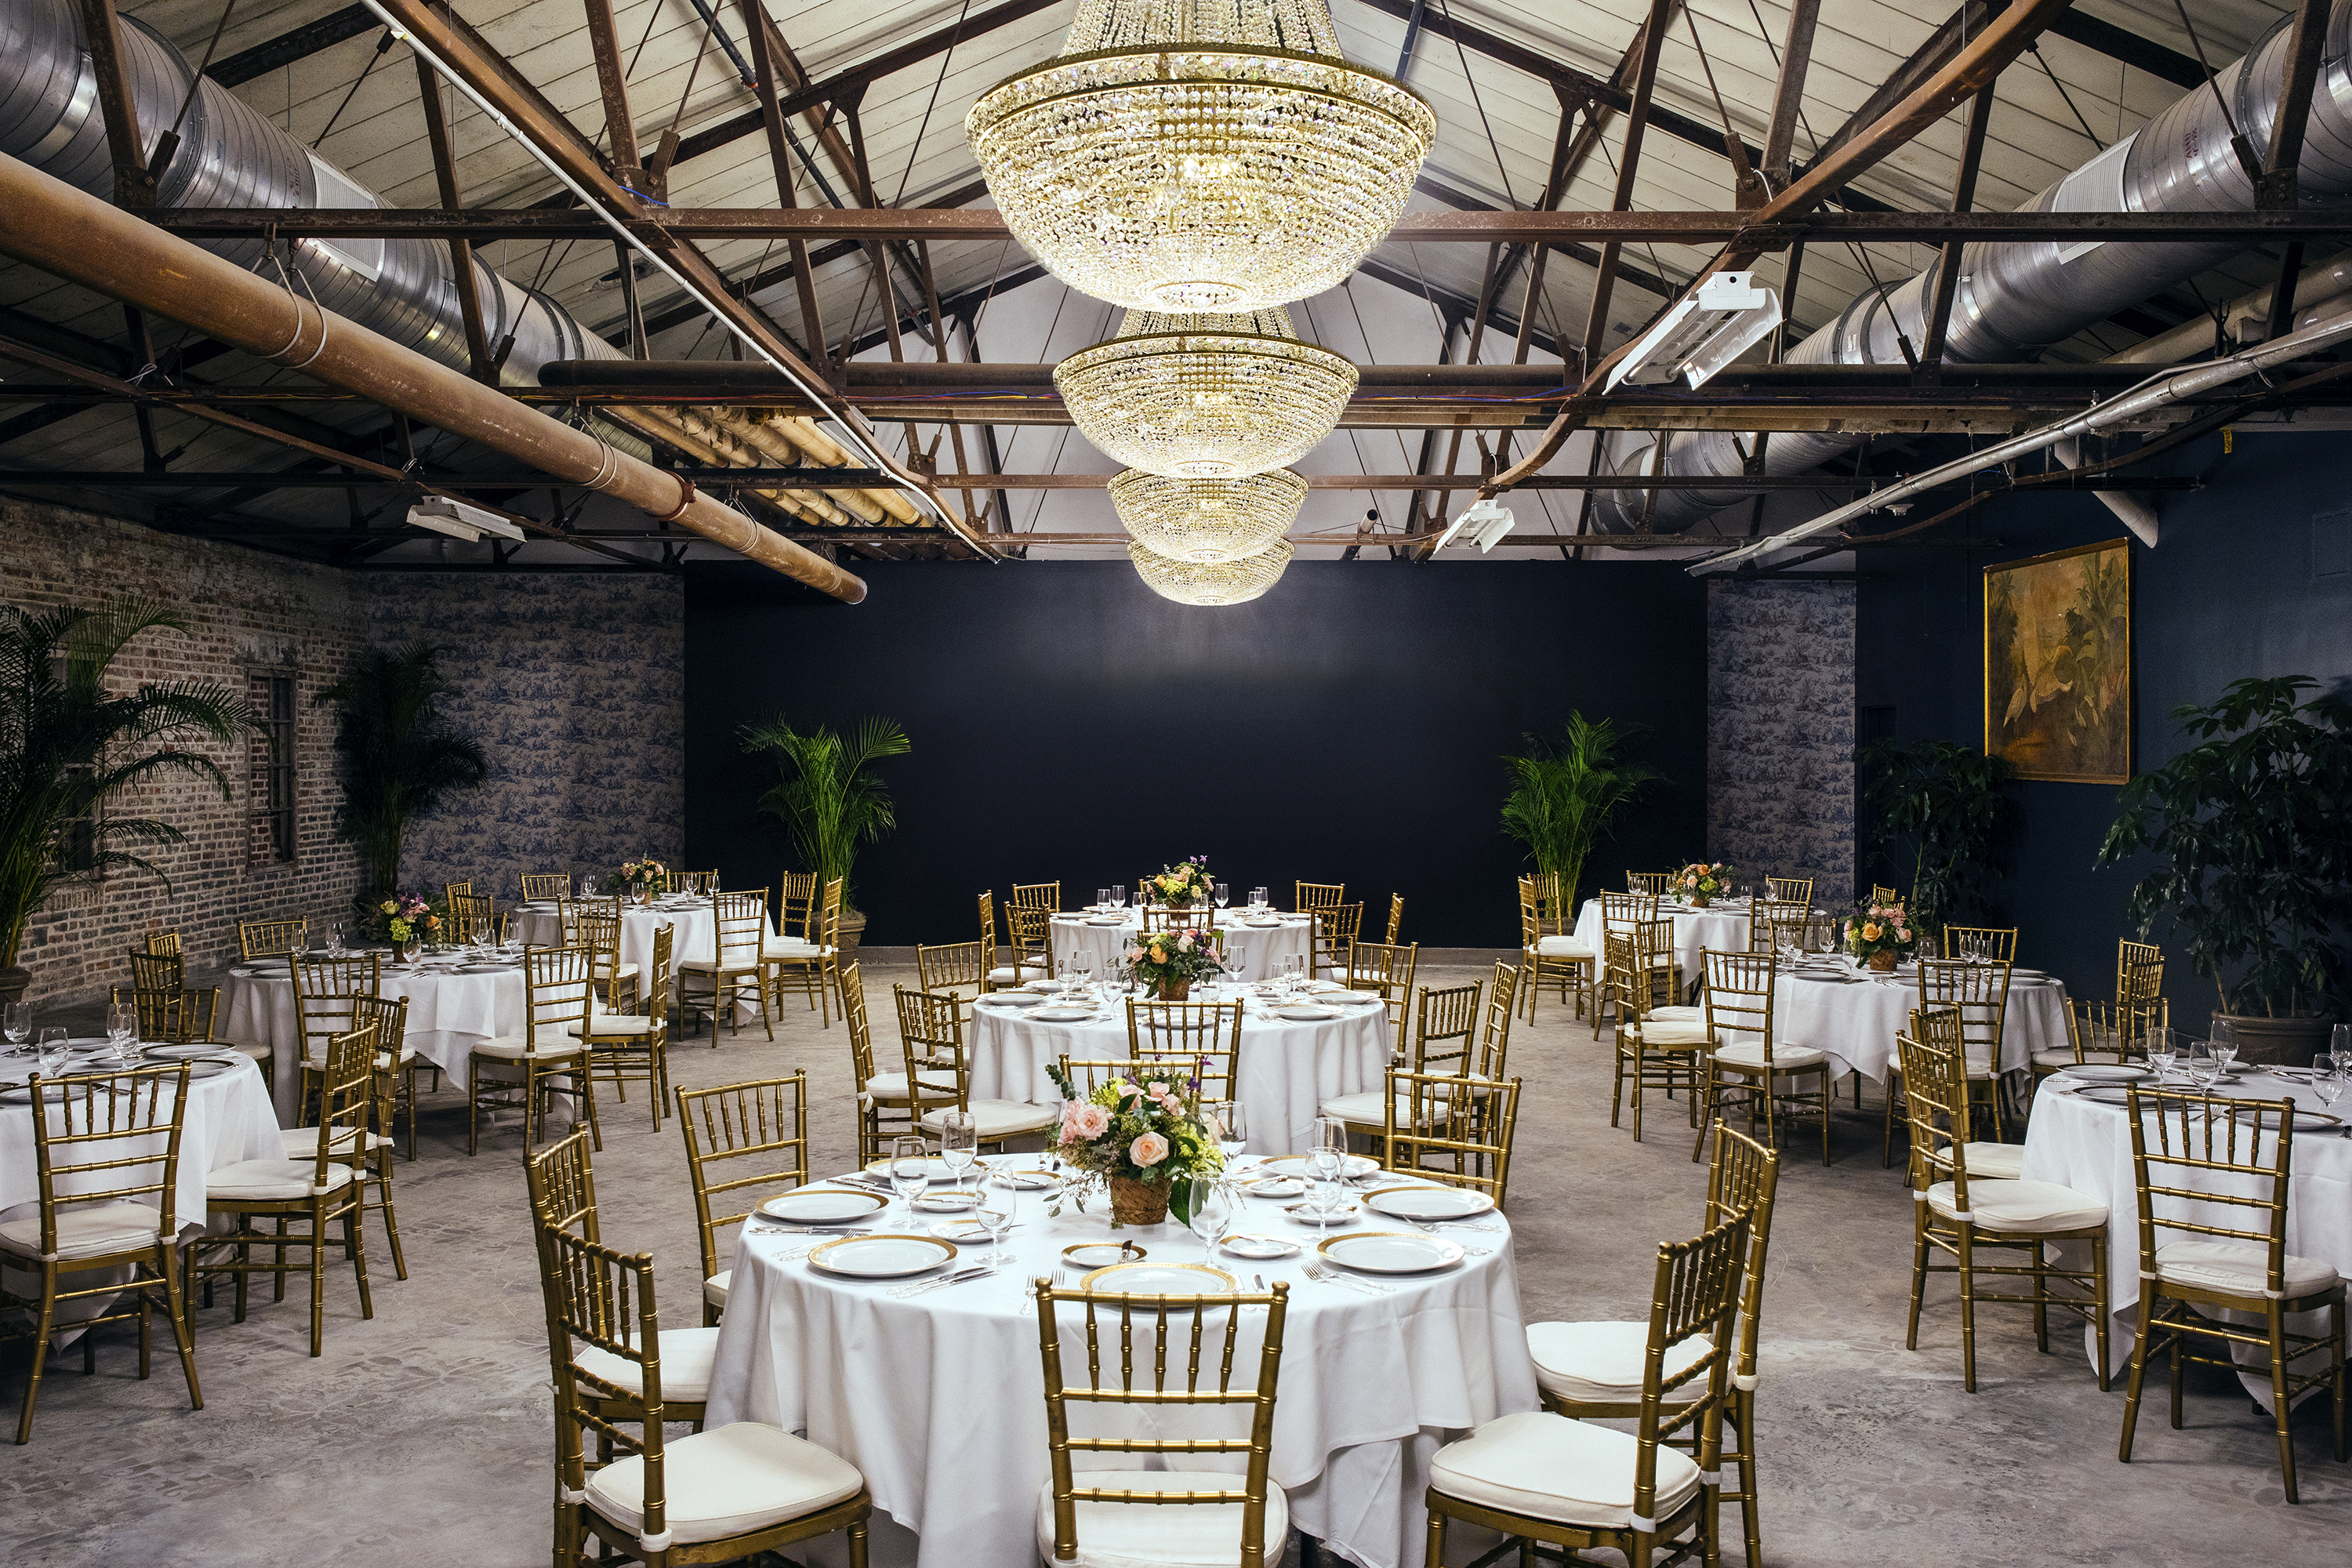 Tables set for a sit down event at our New Orleans event space